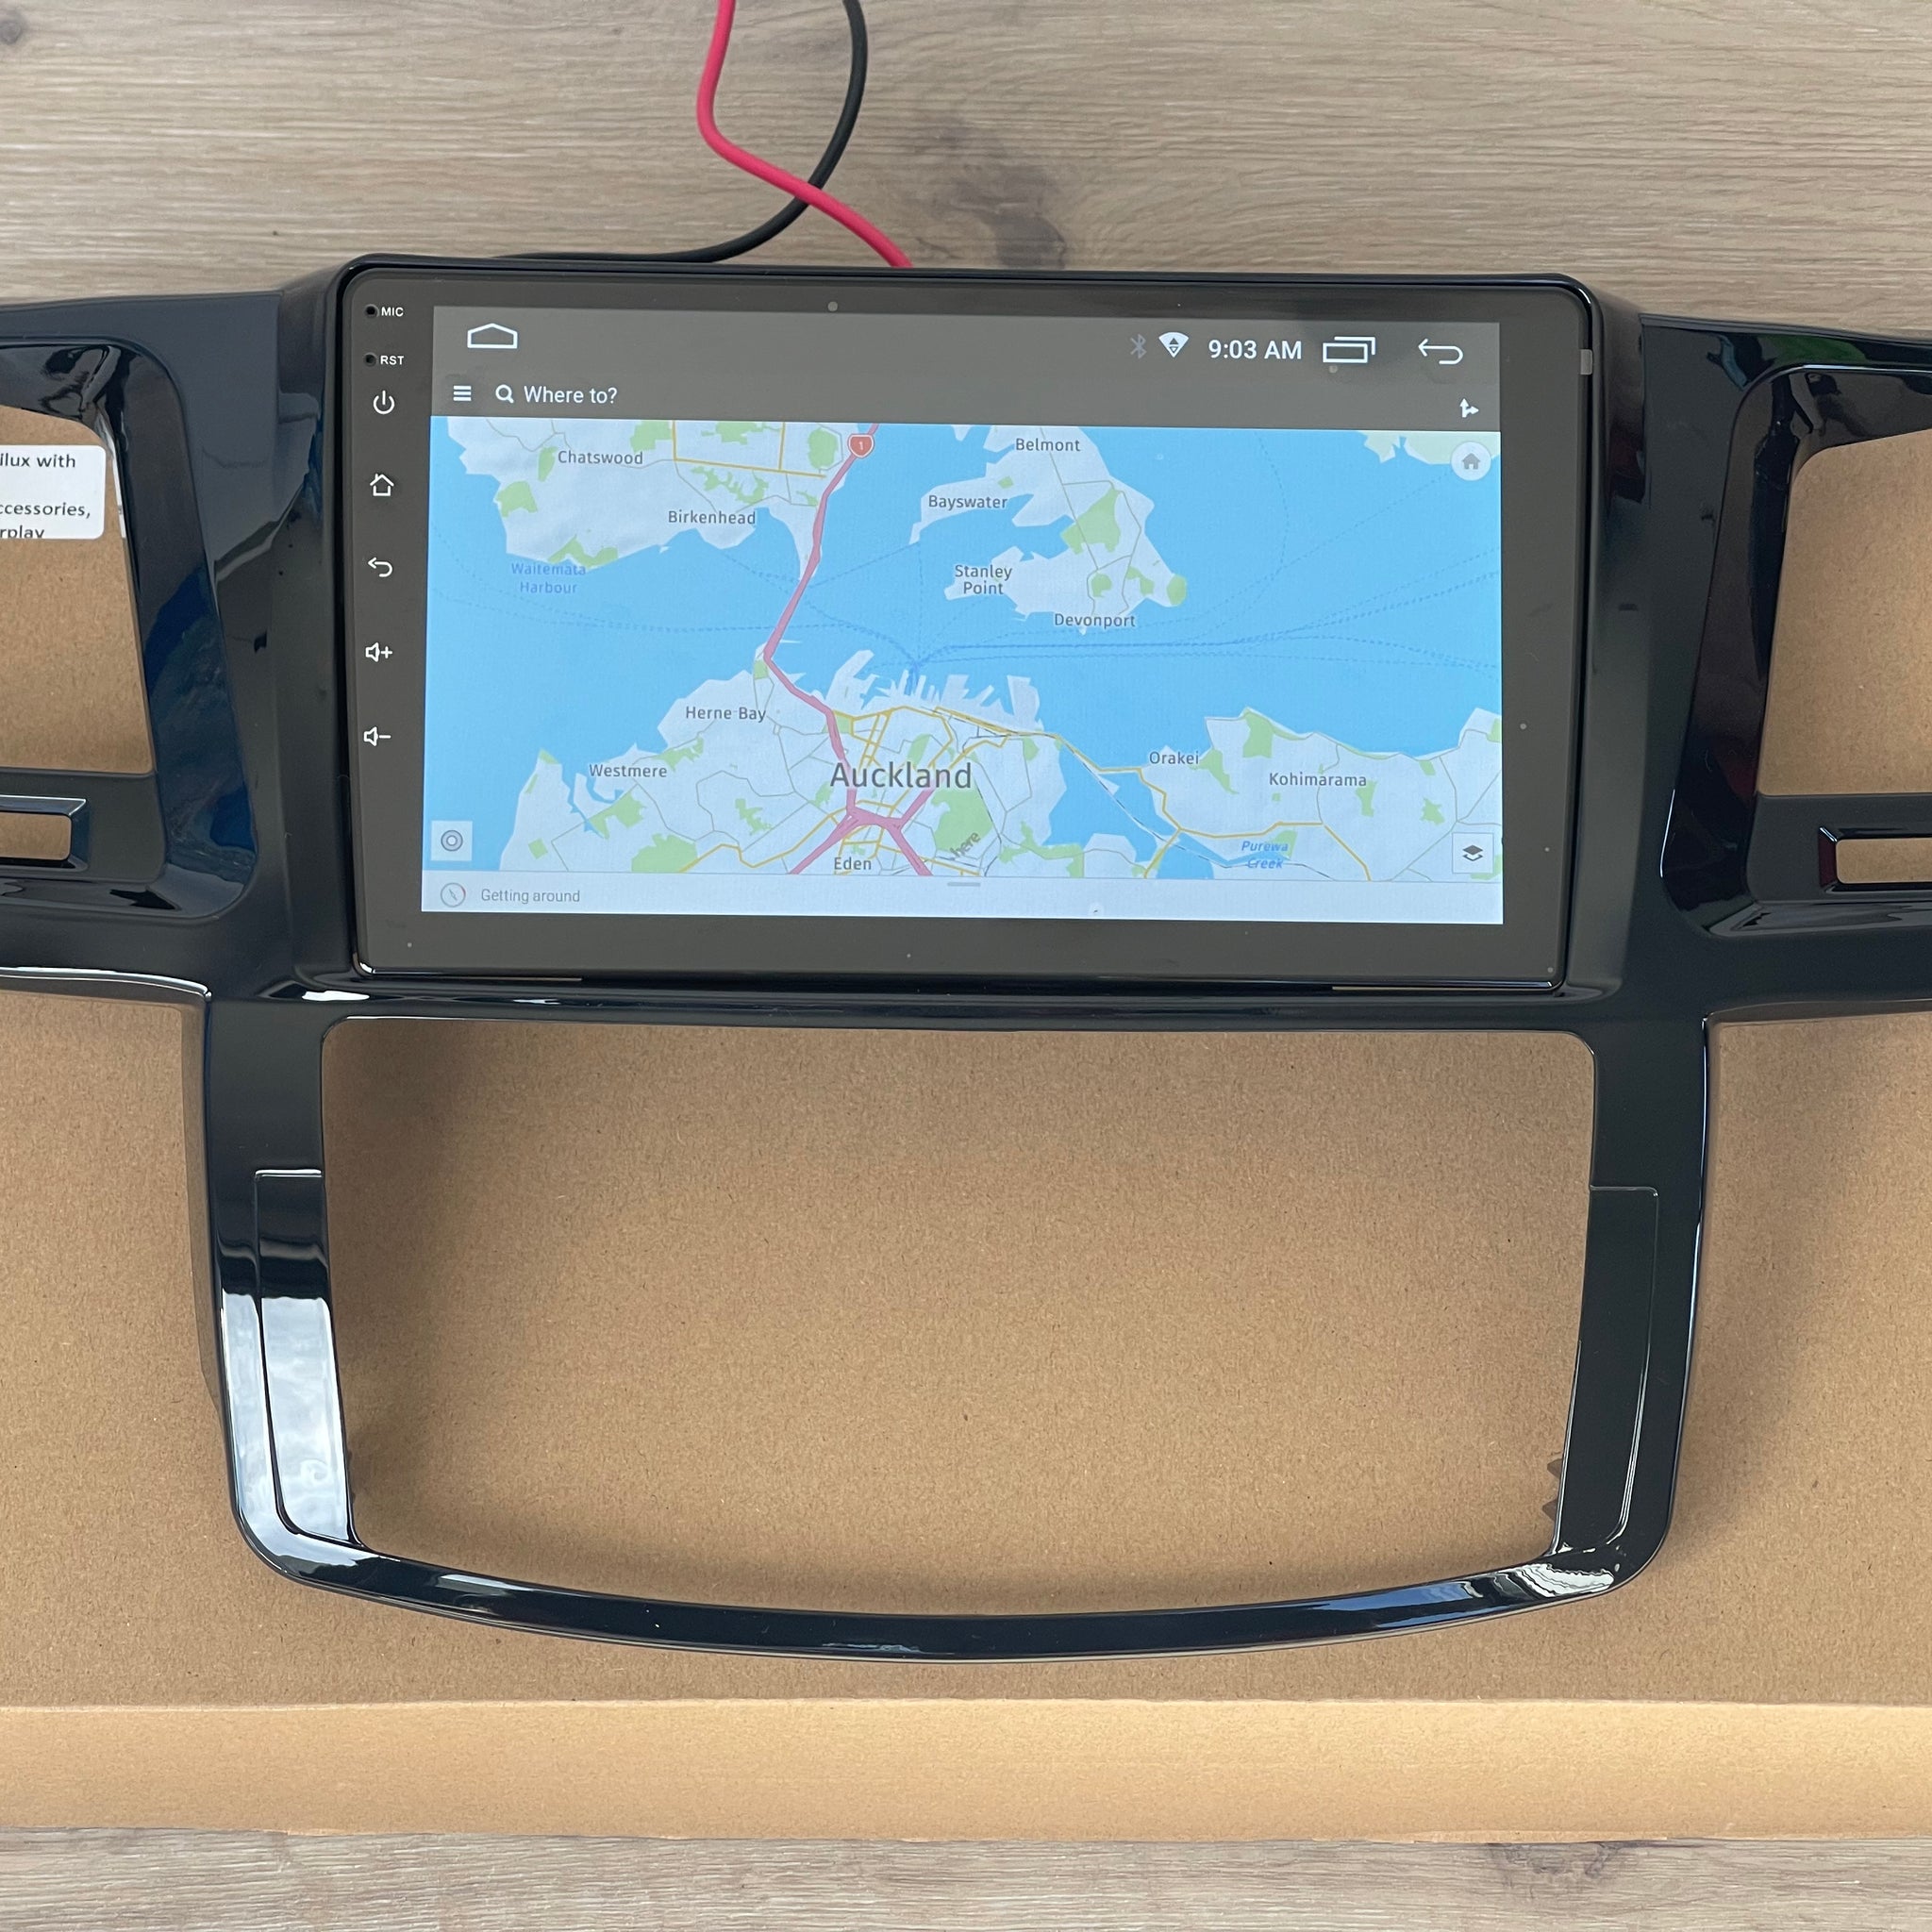 Car Stereo Suit Toyota Hilux N70 9” Supports Apple CarPlay Android Auto GPS NZ Map Android 12 Radio BT Hands Free Calls GGN15, GGN25, KUN16, KUN26, TGN16 SRS V8 4.0 SR5 dc